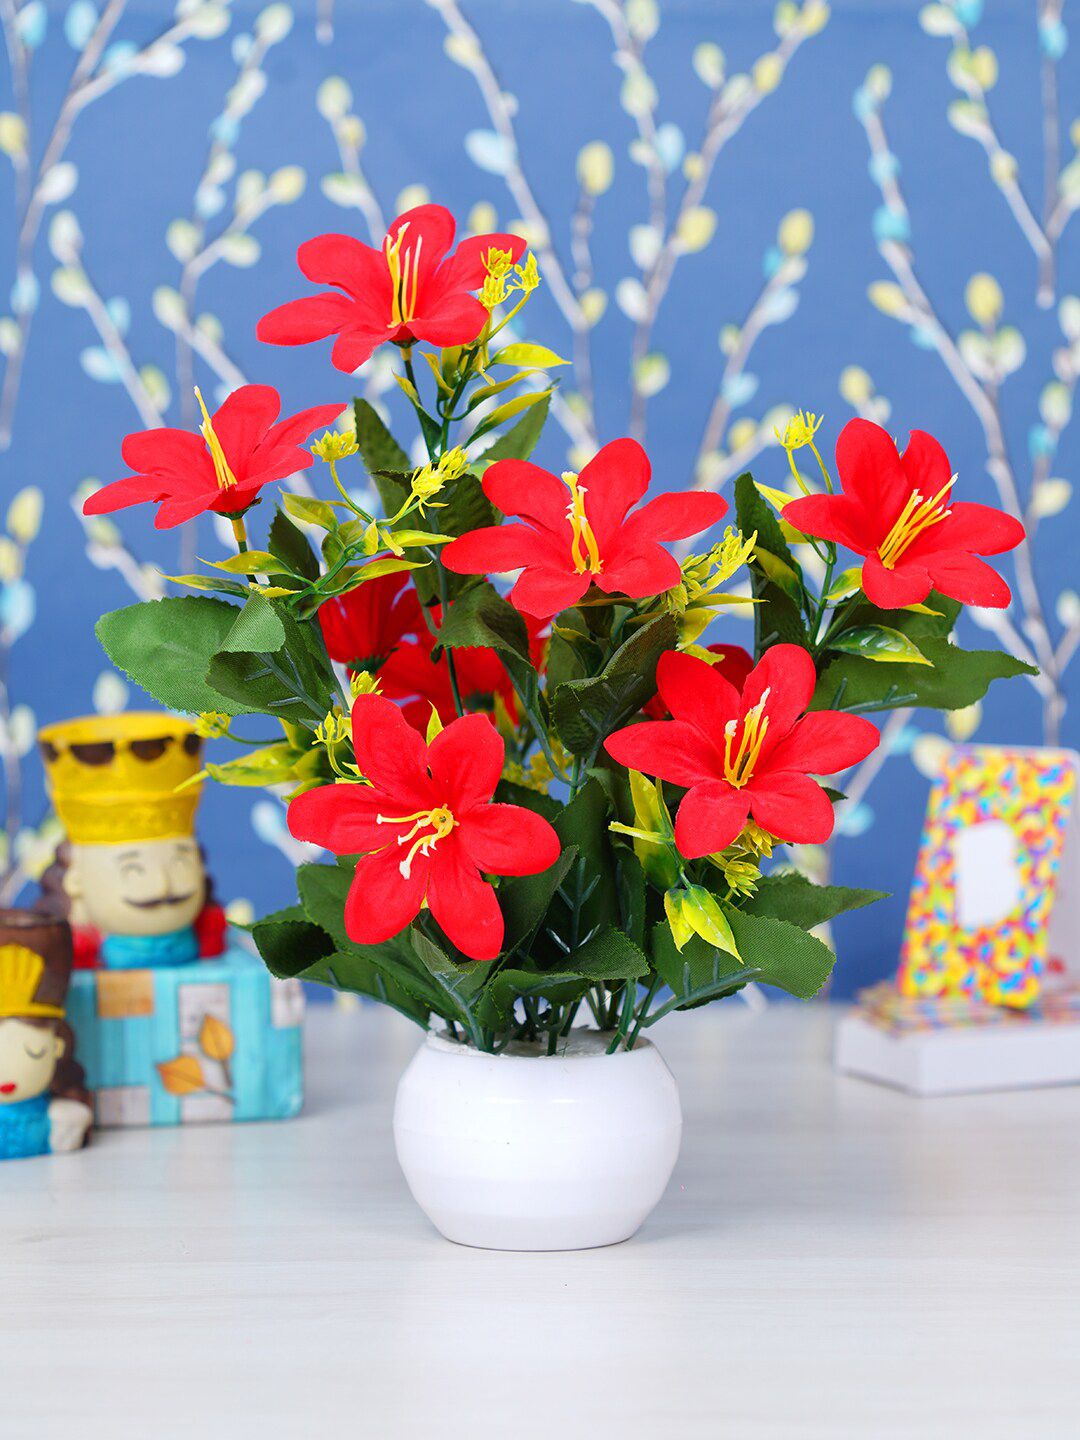 Dekorly Red & Green Lilly Flower Basket With Pot Price in India